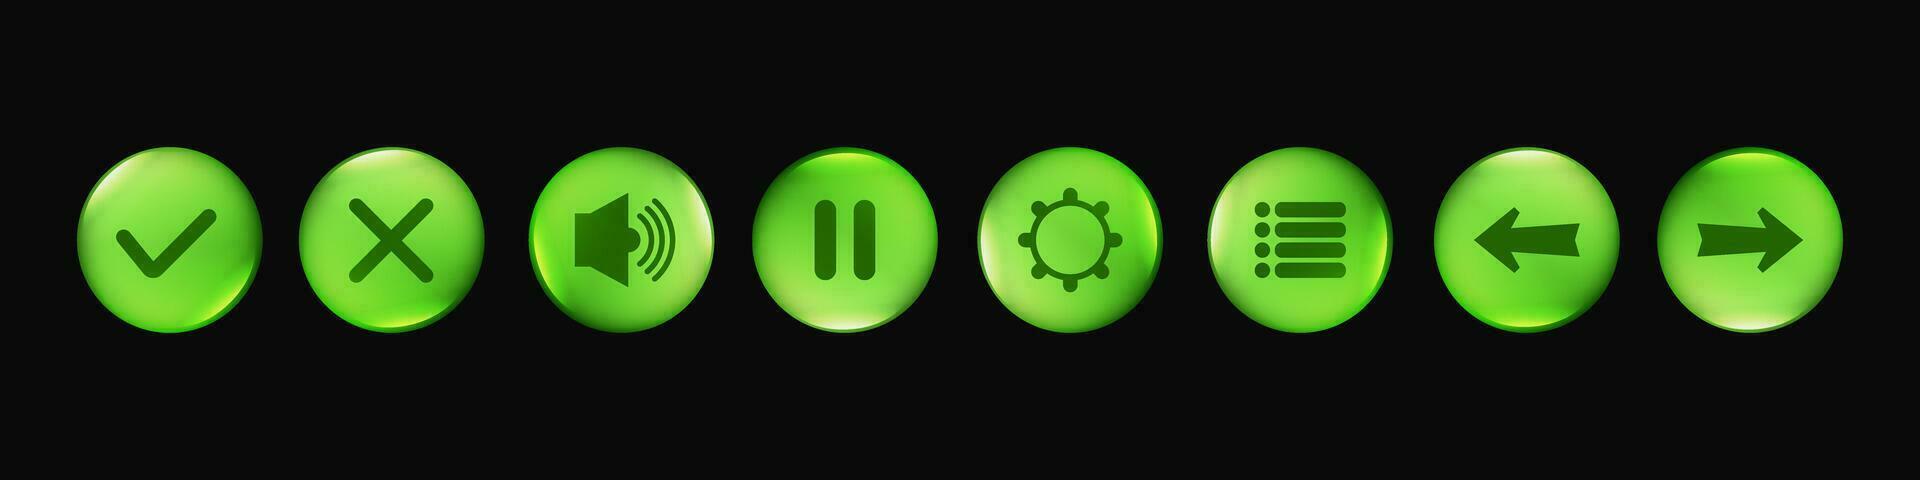 green glossy button set ui game element illustration vector